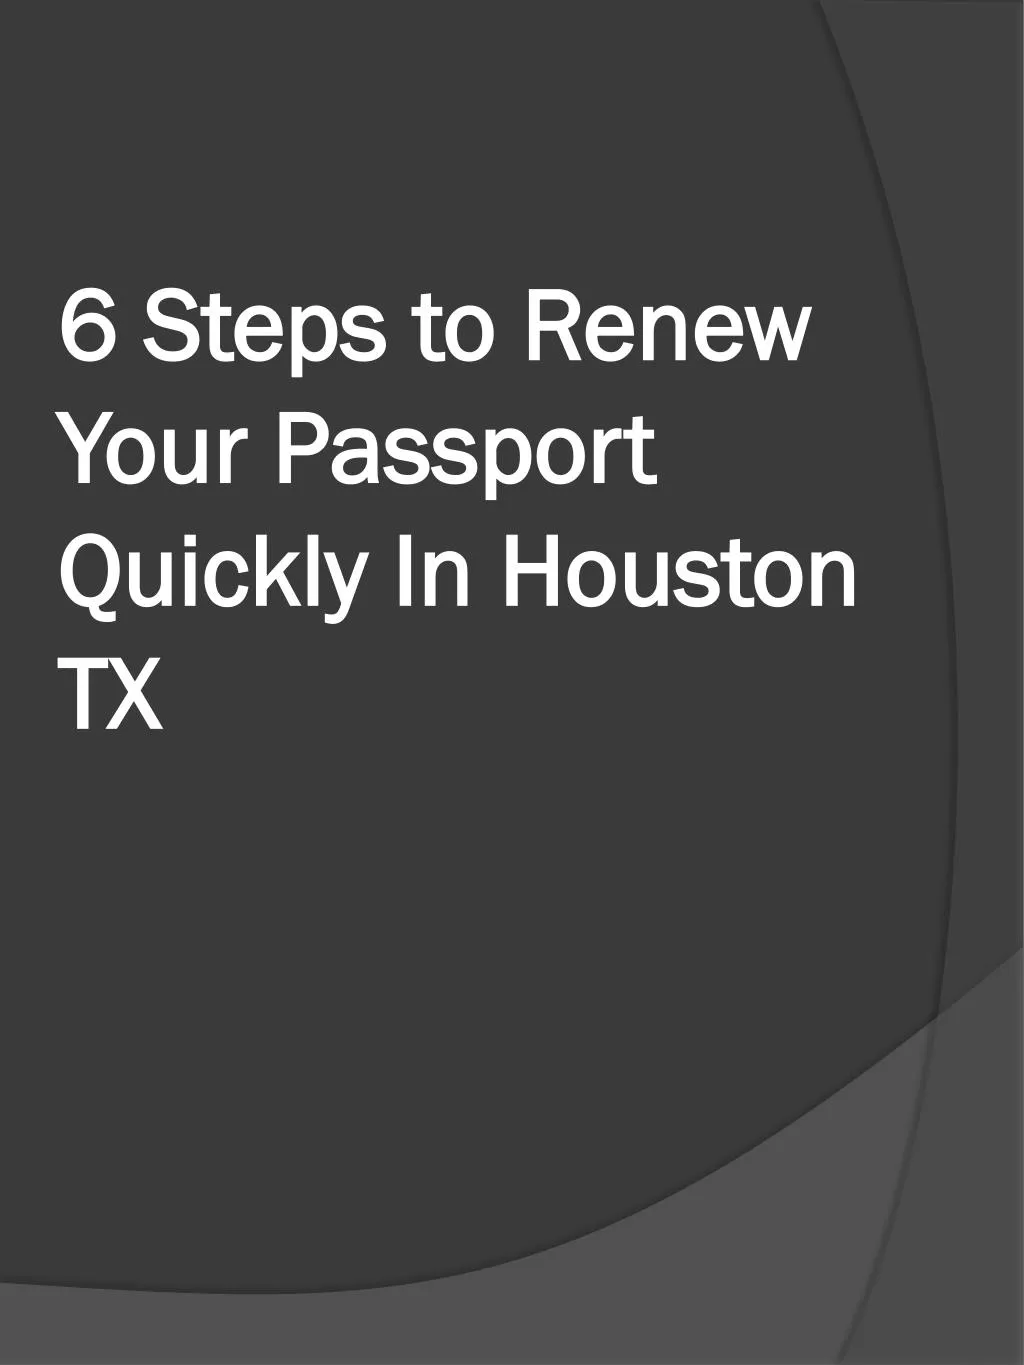 6 steps to renew your passport quickly in houston tx